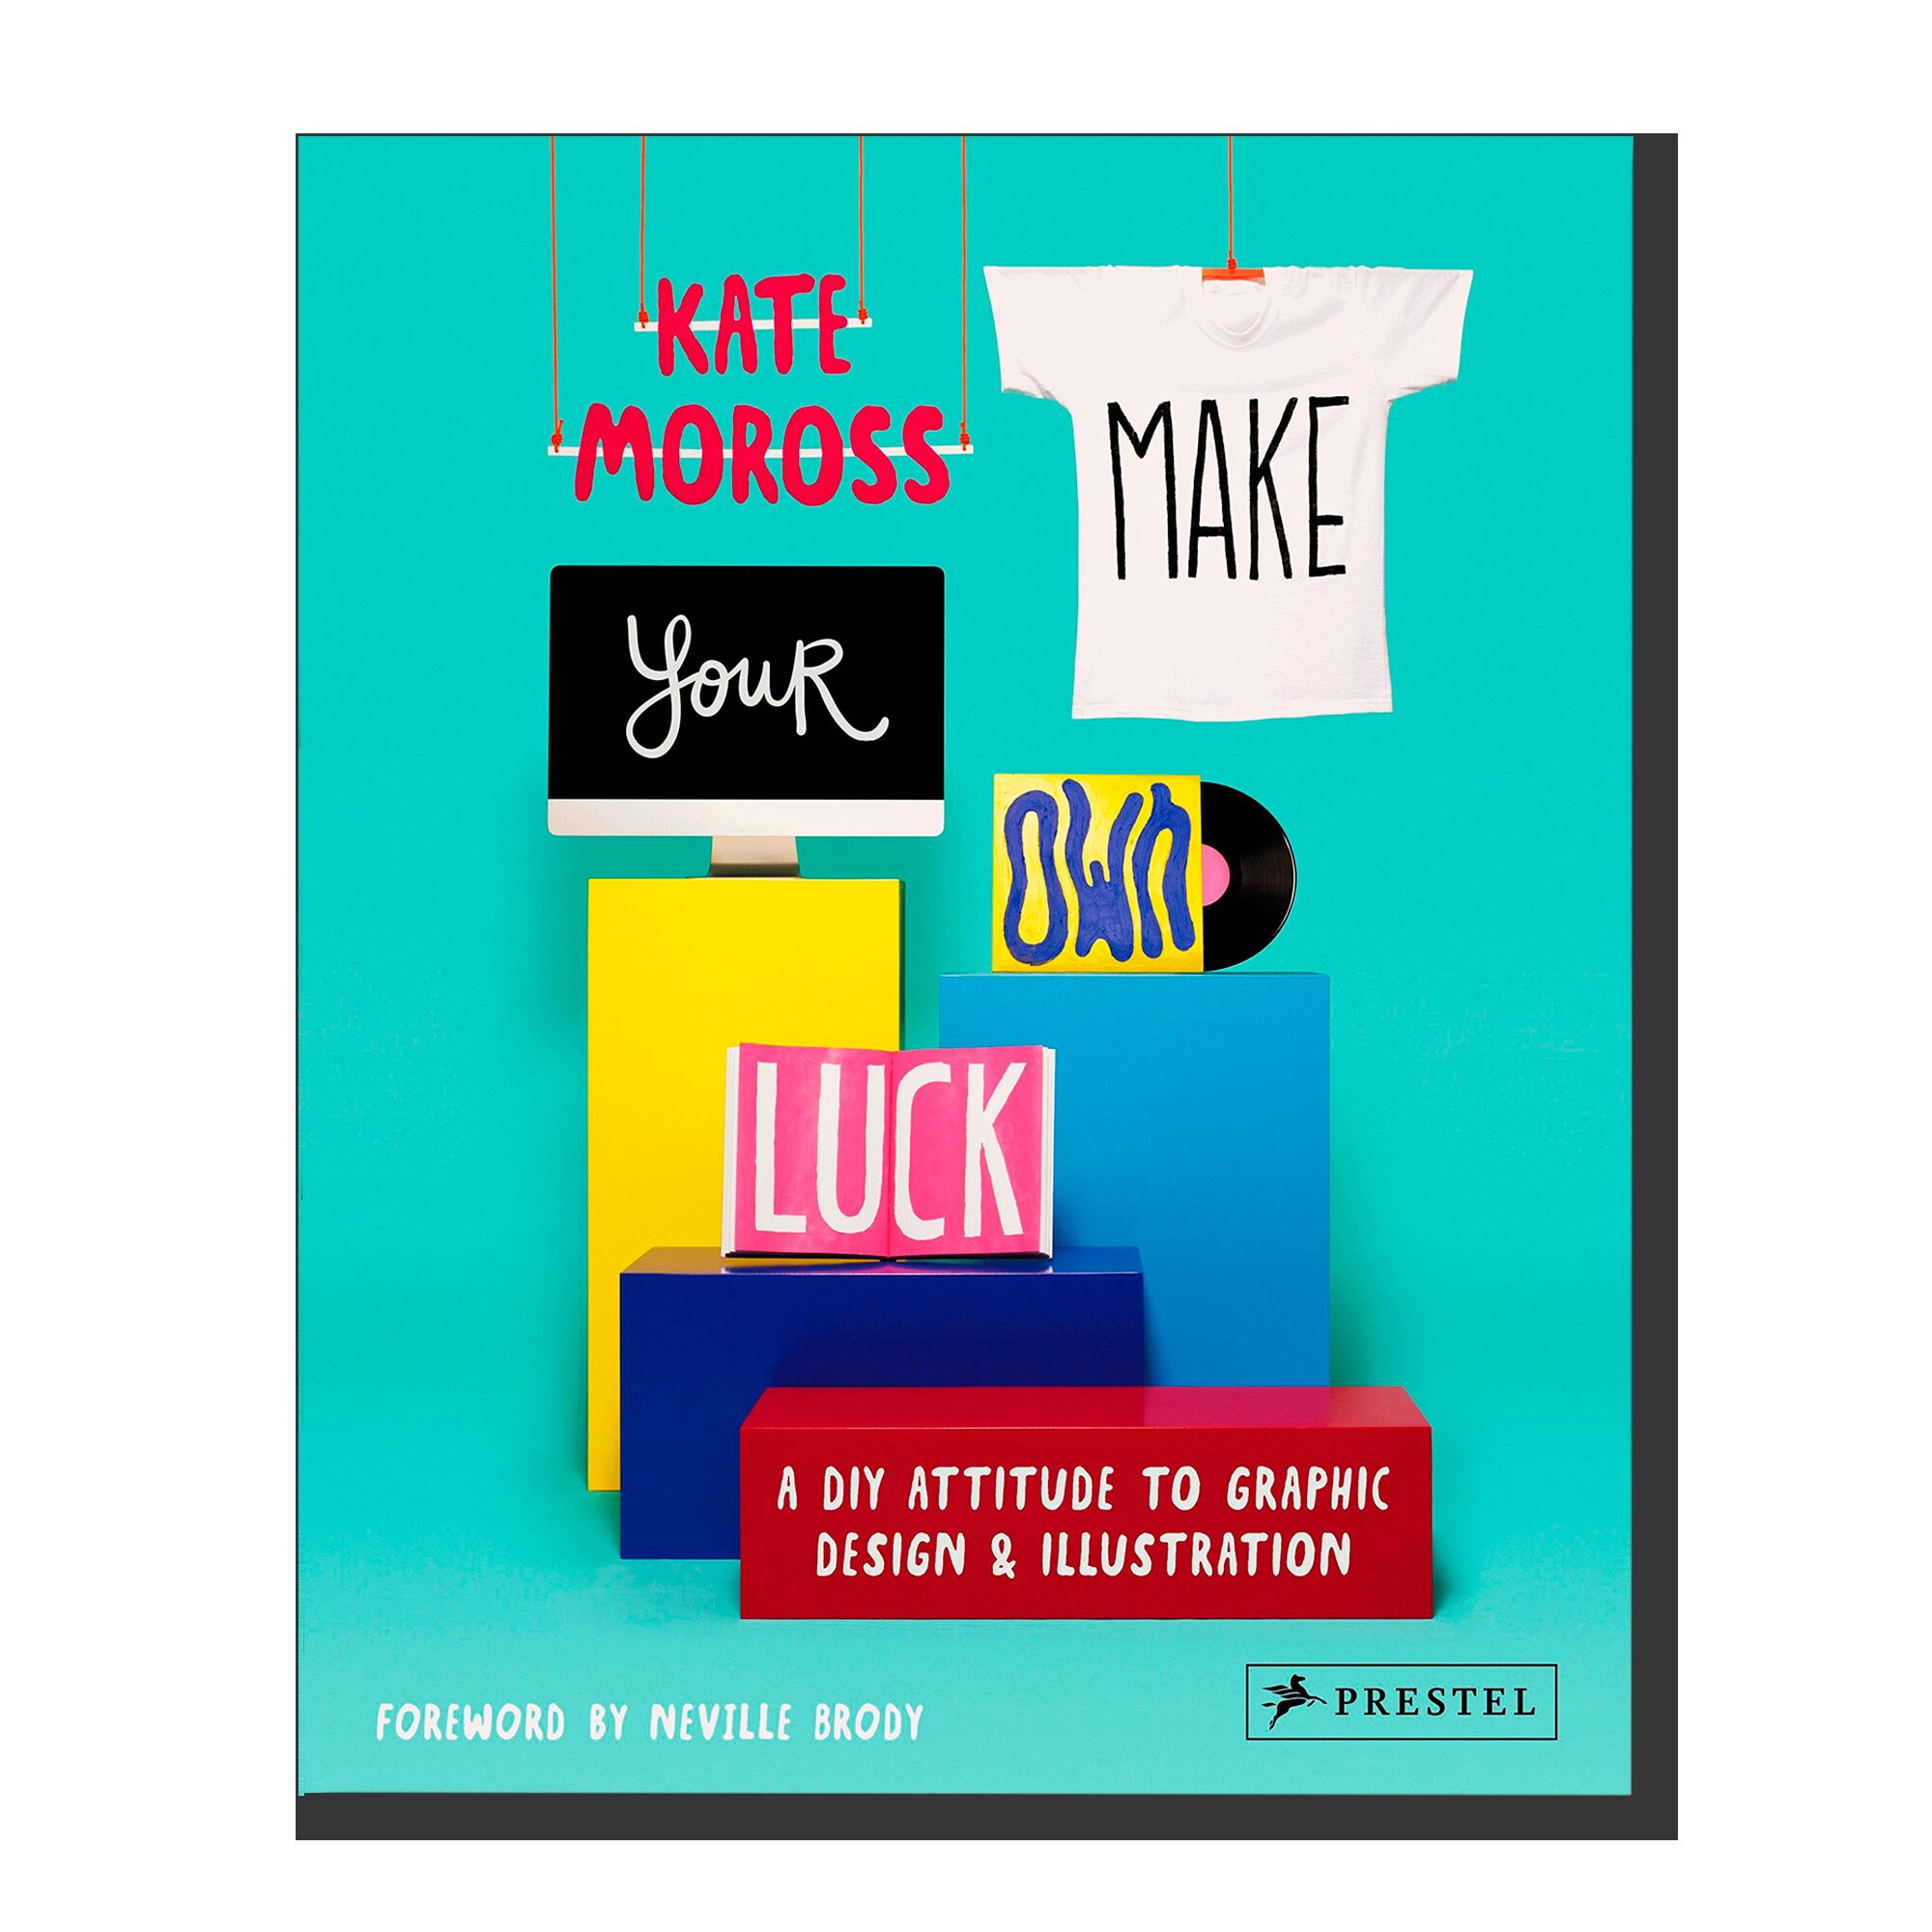 Make Your Own Luck: A DIY Attitude to Graphic Design and Illustration